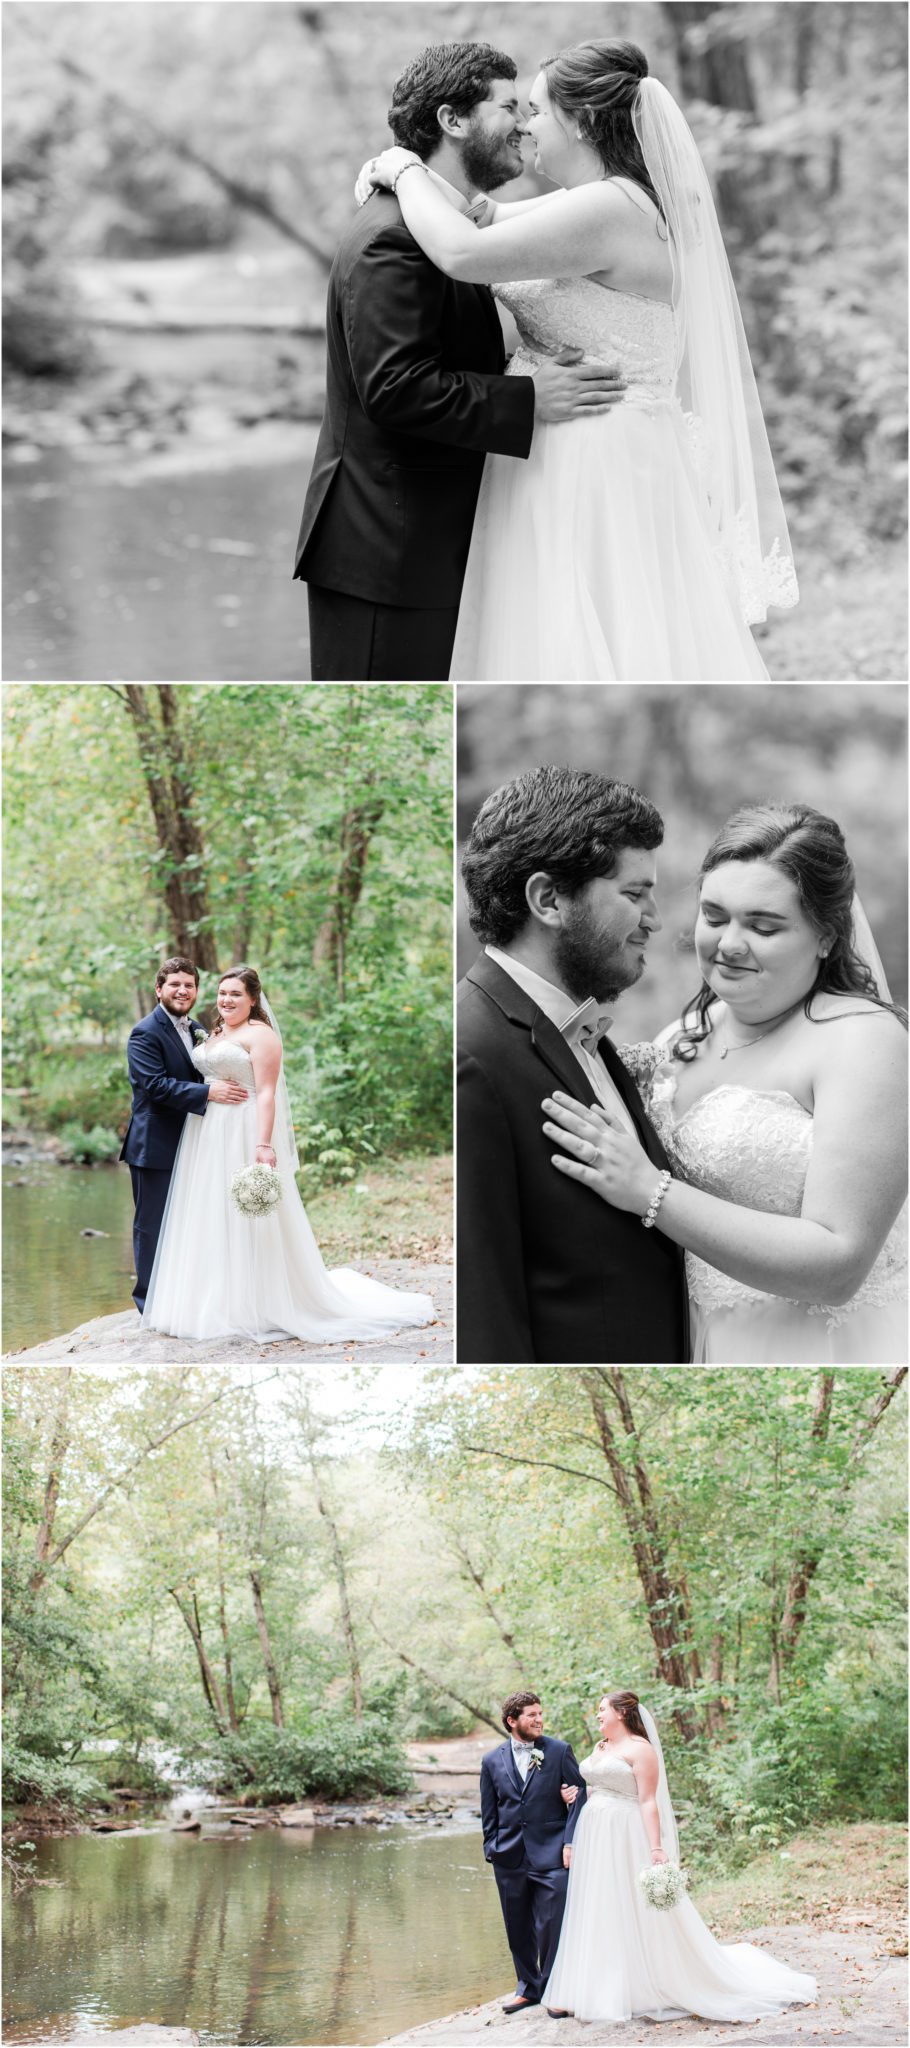 A Summer Wedding at the Barn at Greene Acres in Anderson SC Bride and Groom Photos